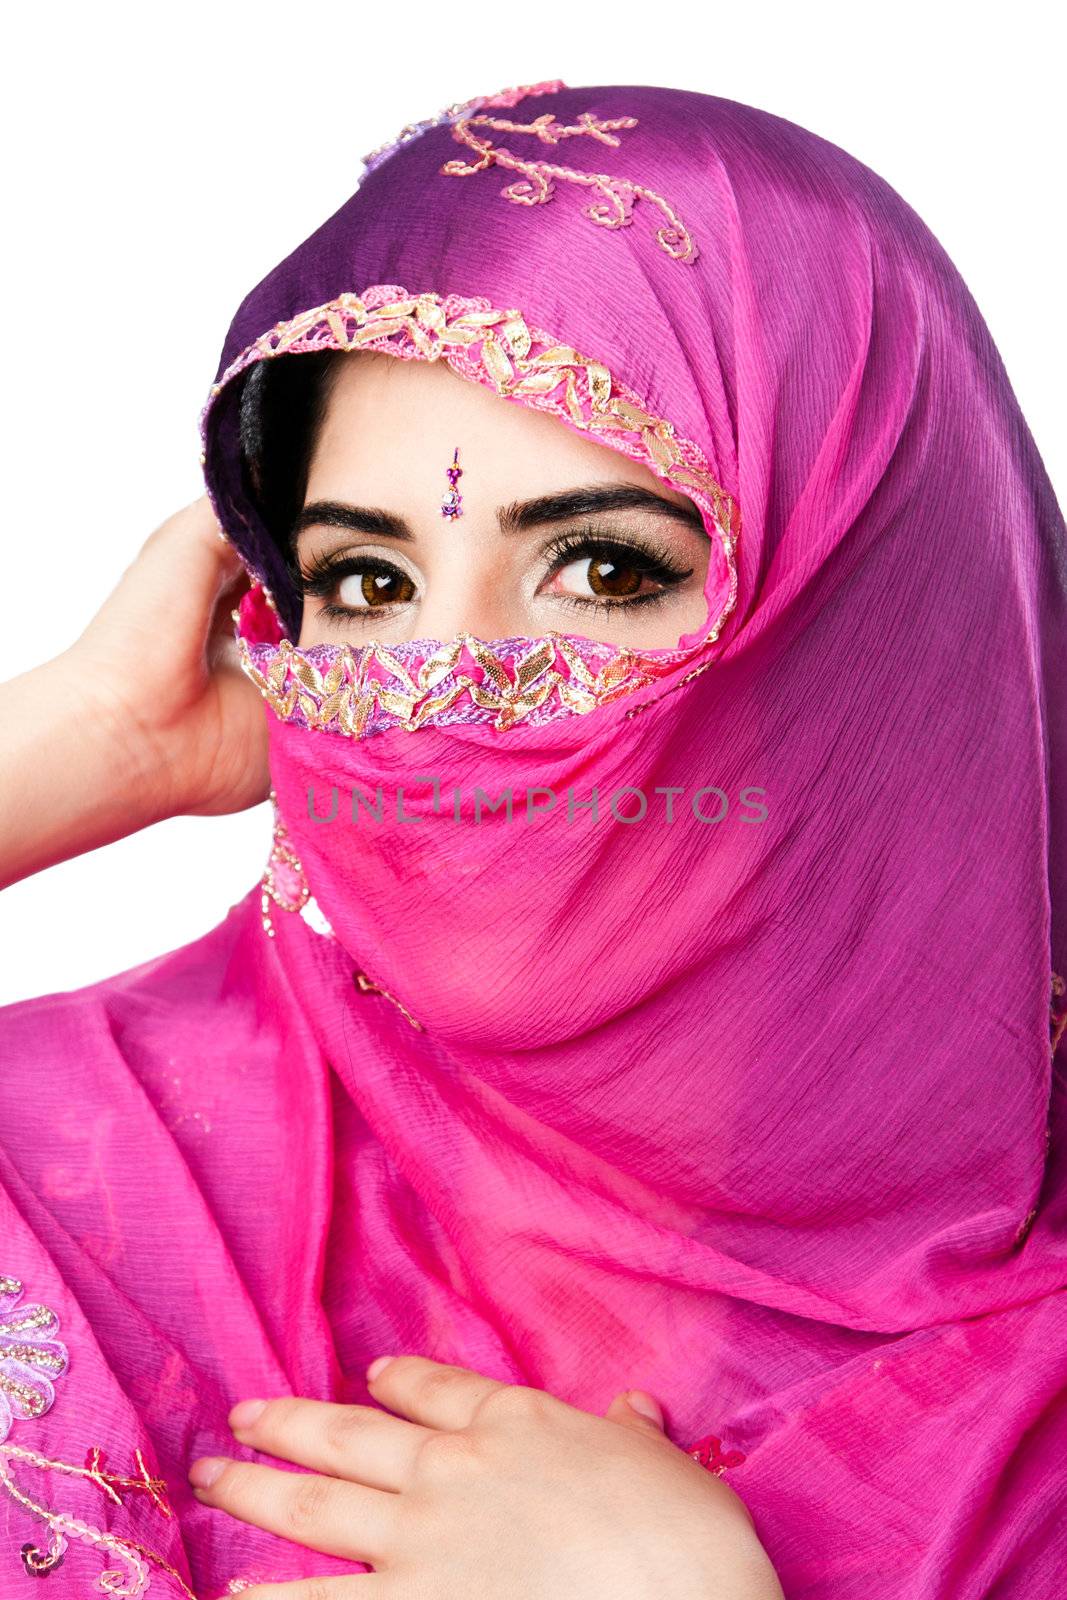 Beautiful Bengali Indian Hindu woman holding colorful headscarf veil in front of face, isolated